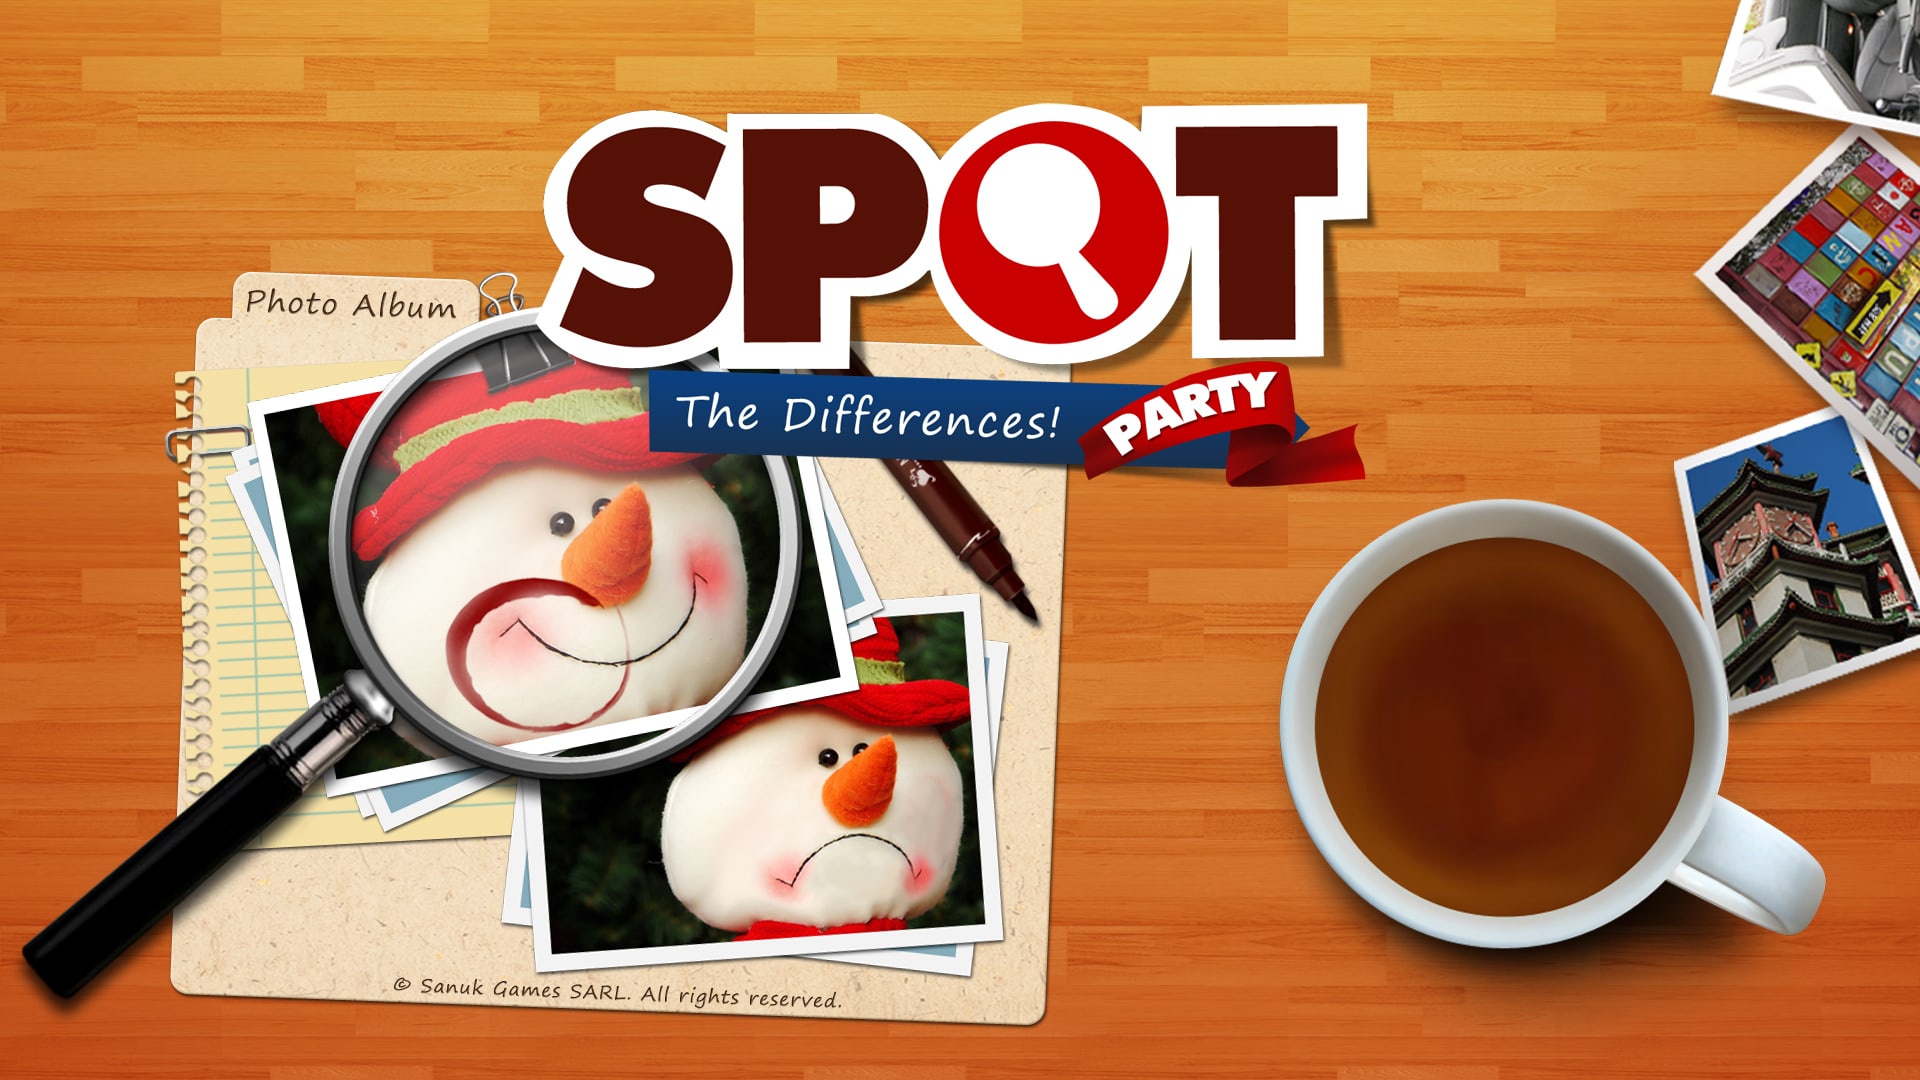 Spot The Differences: Party!